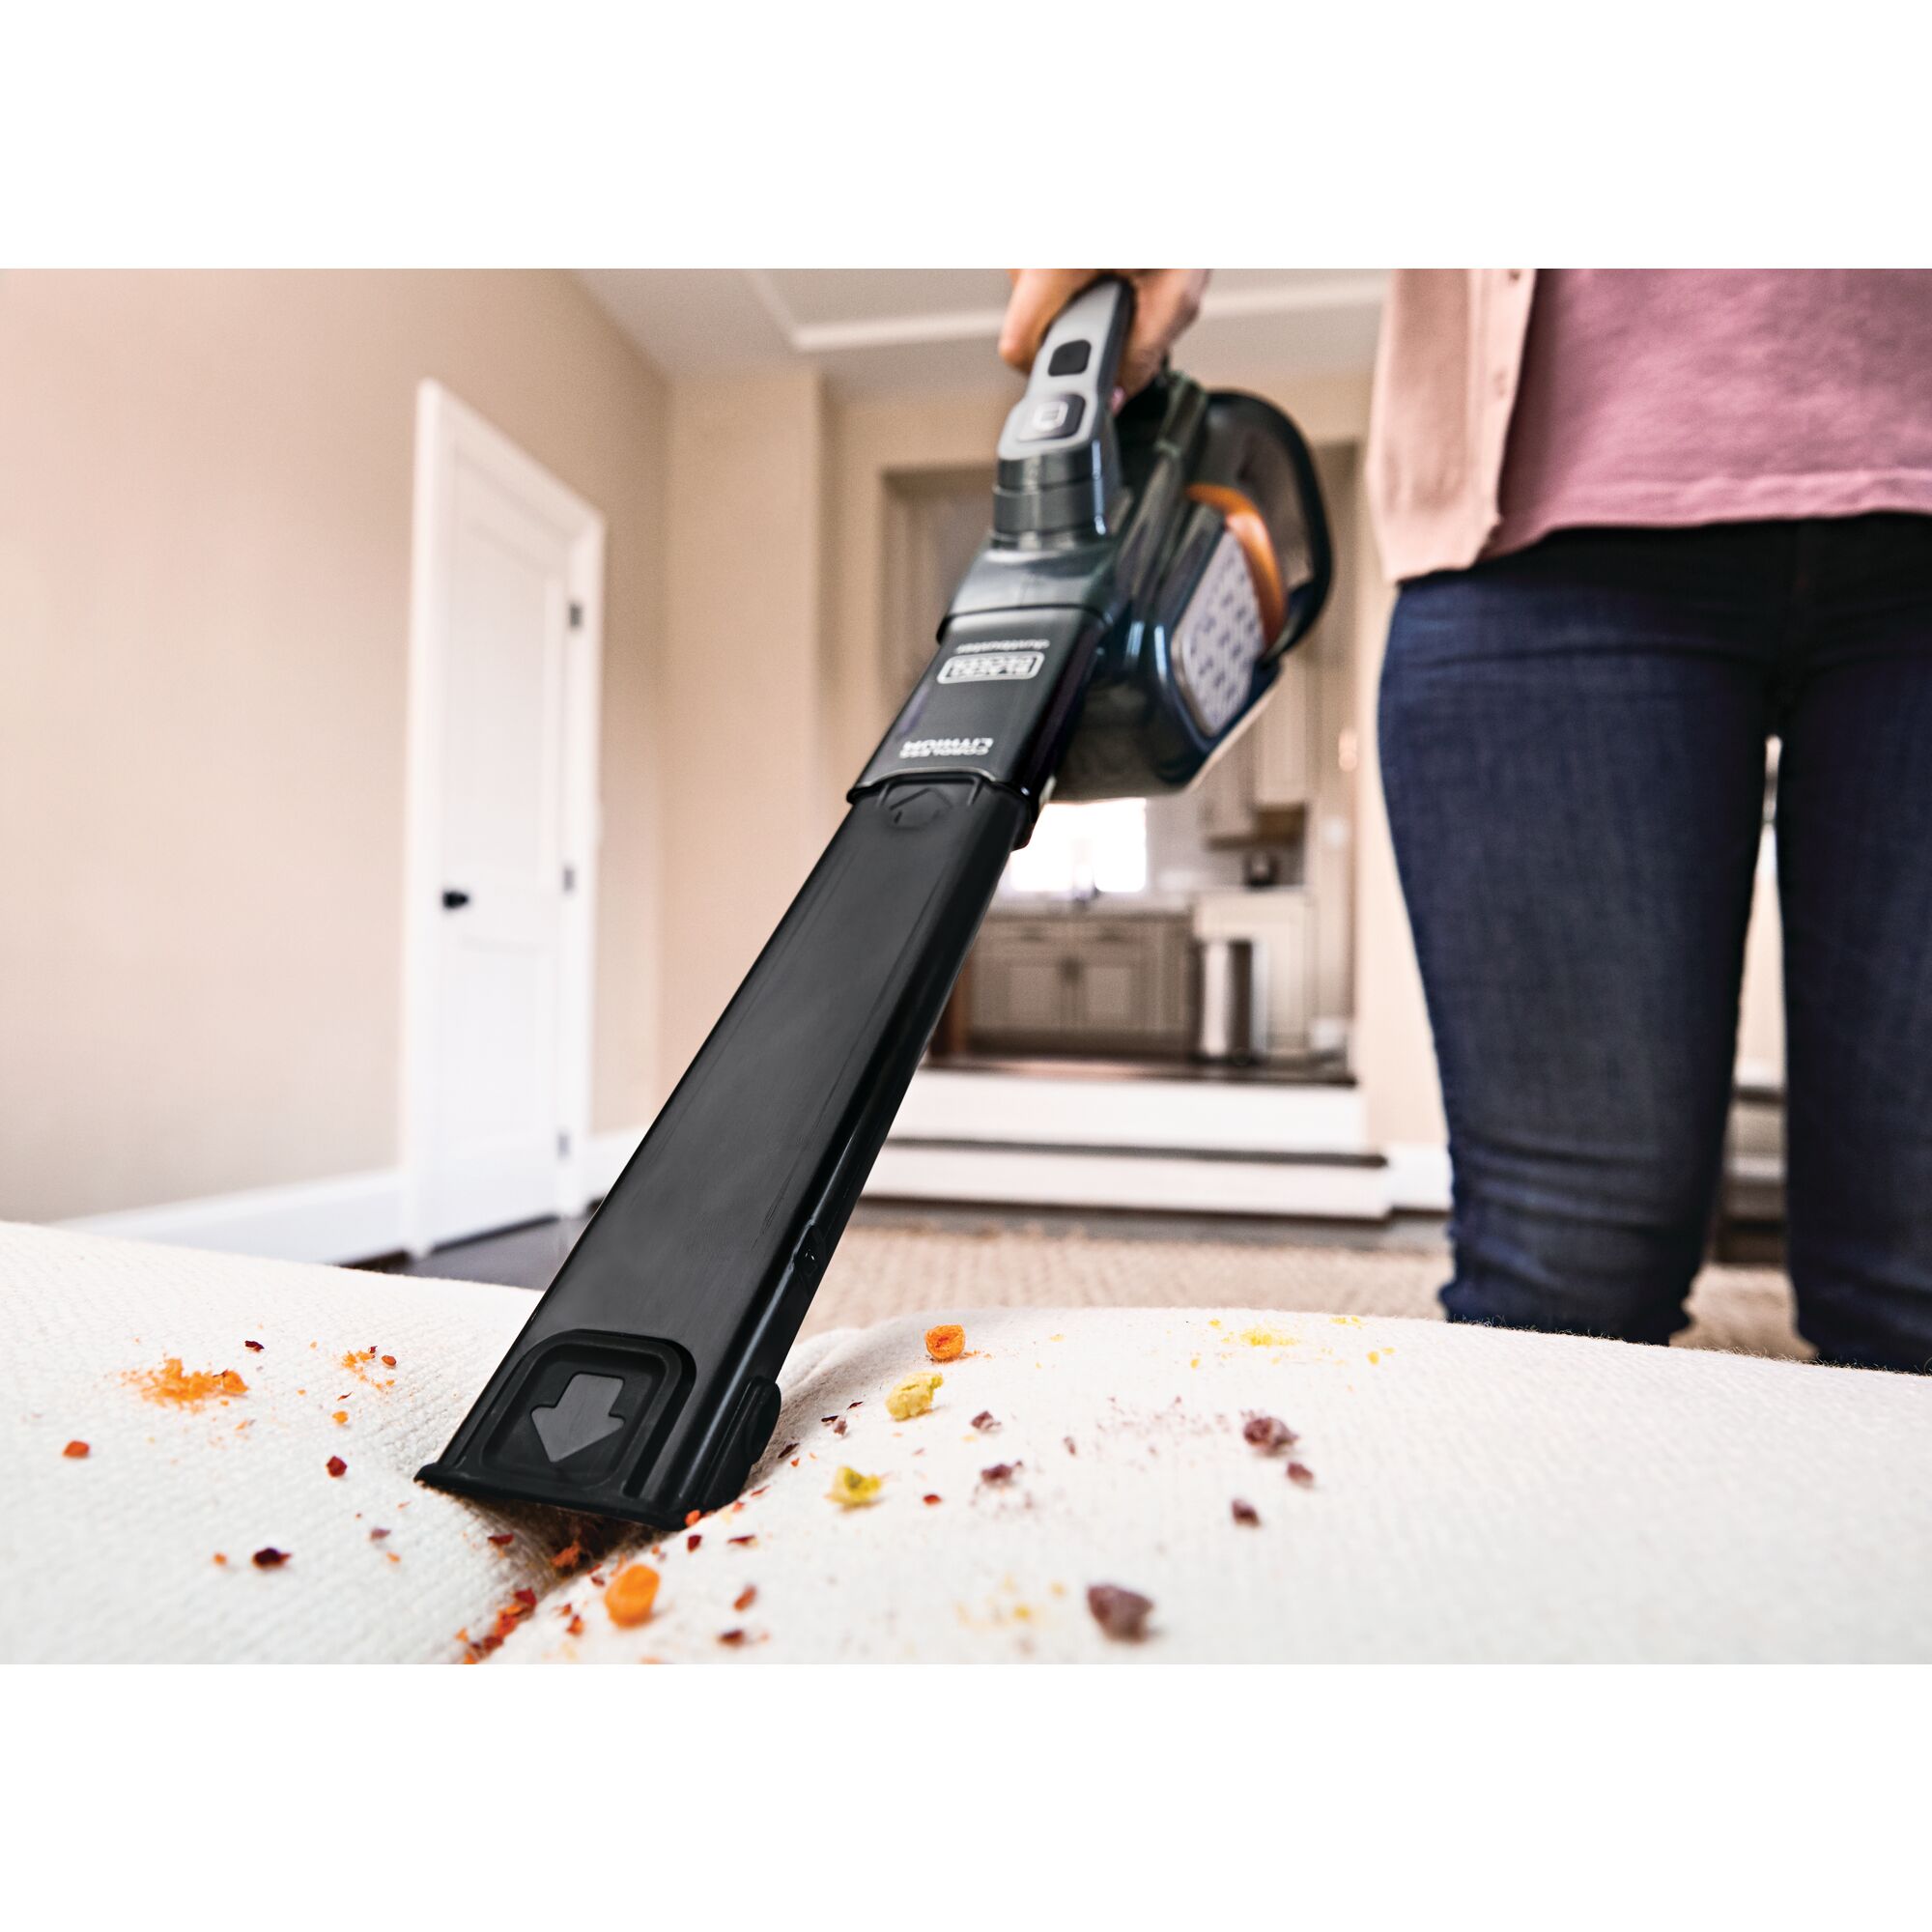 16 volt max dustbuster advanced clean plus hand vacuum being used to vacuum spilled material from a sofa.